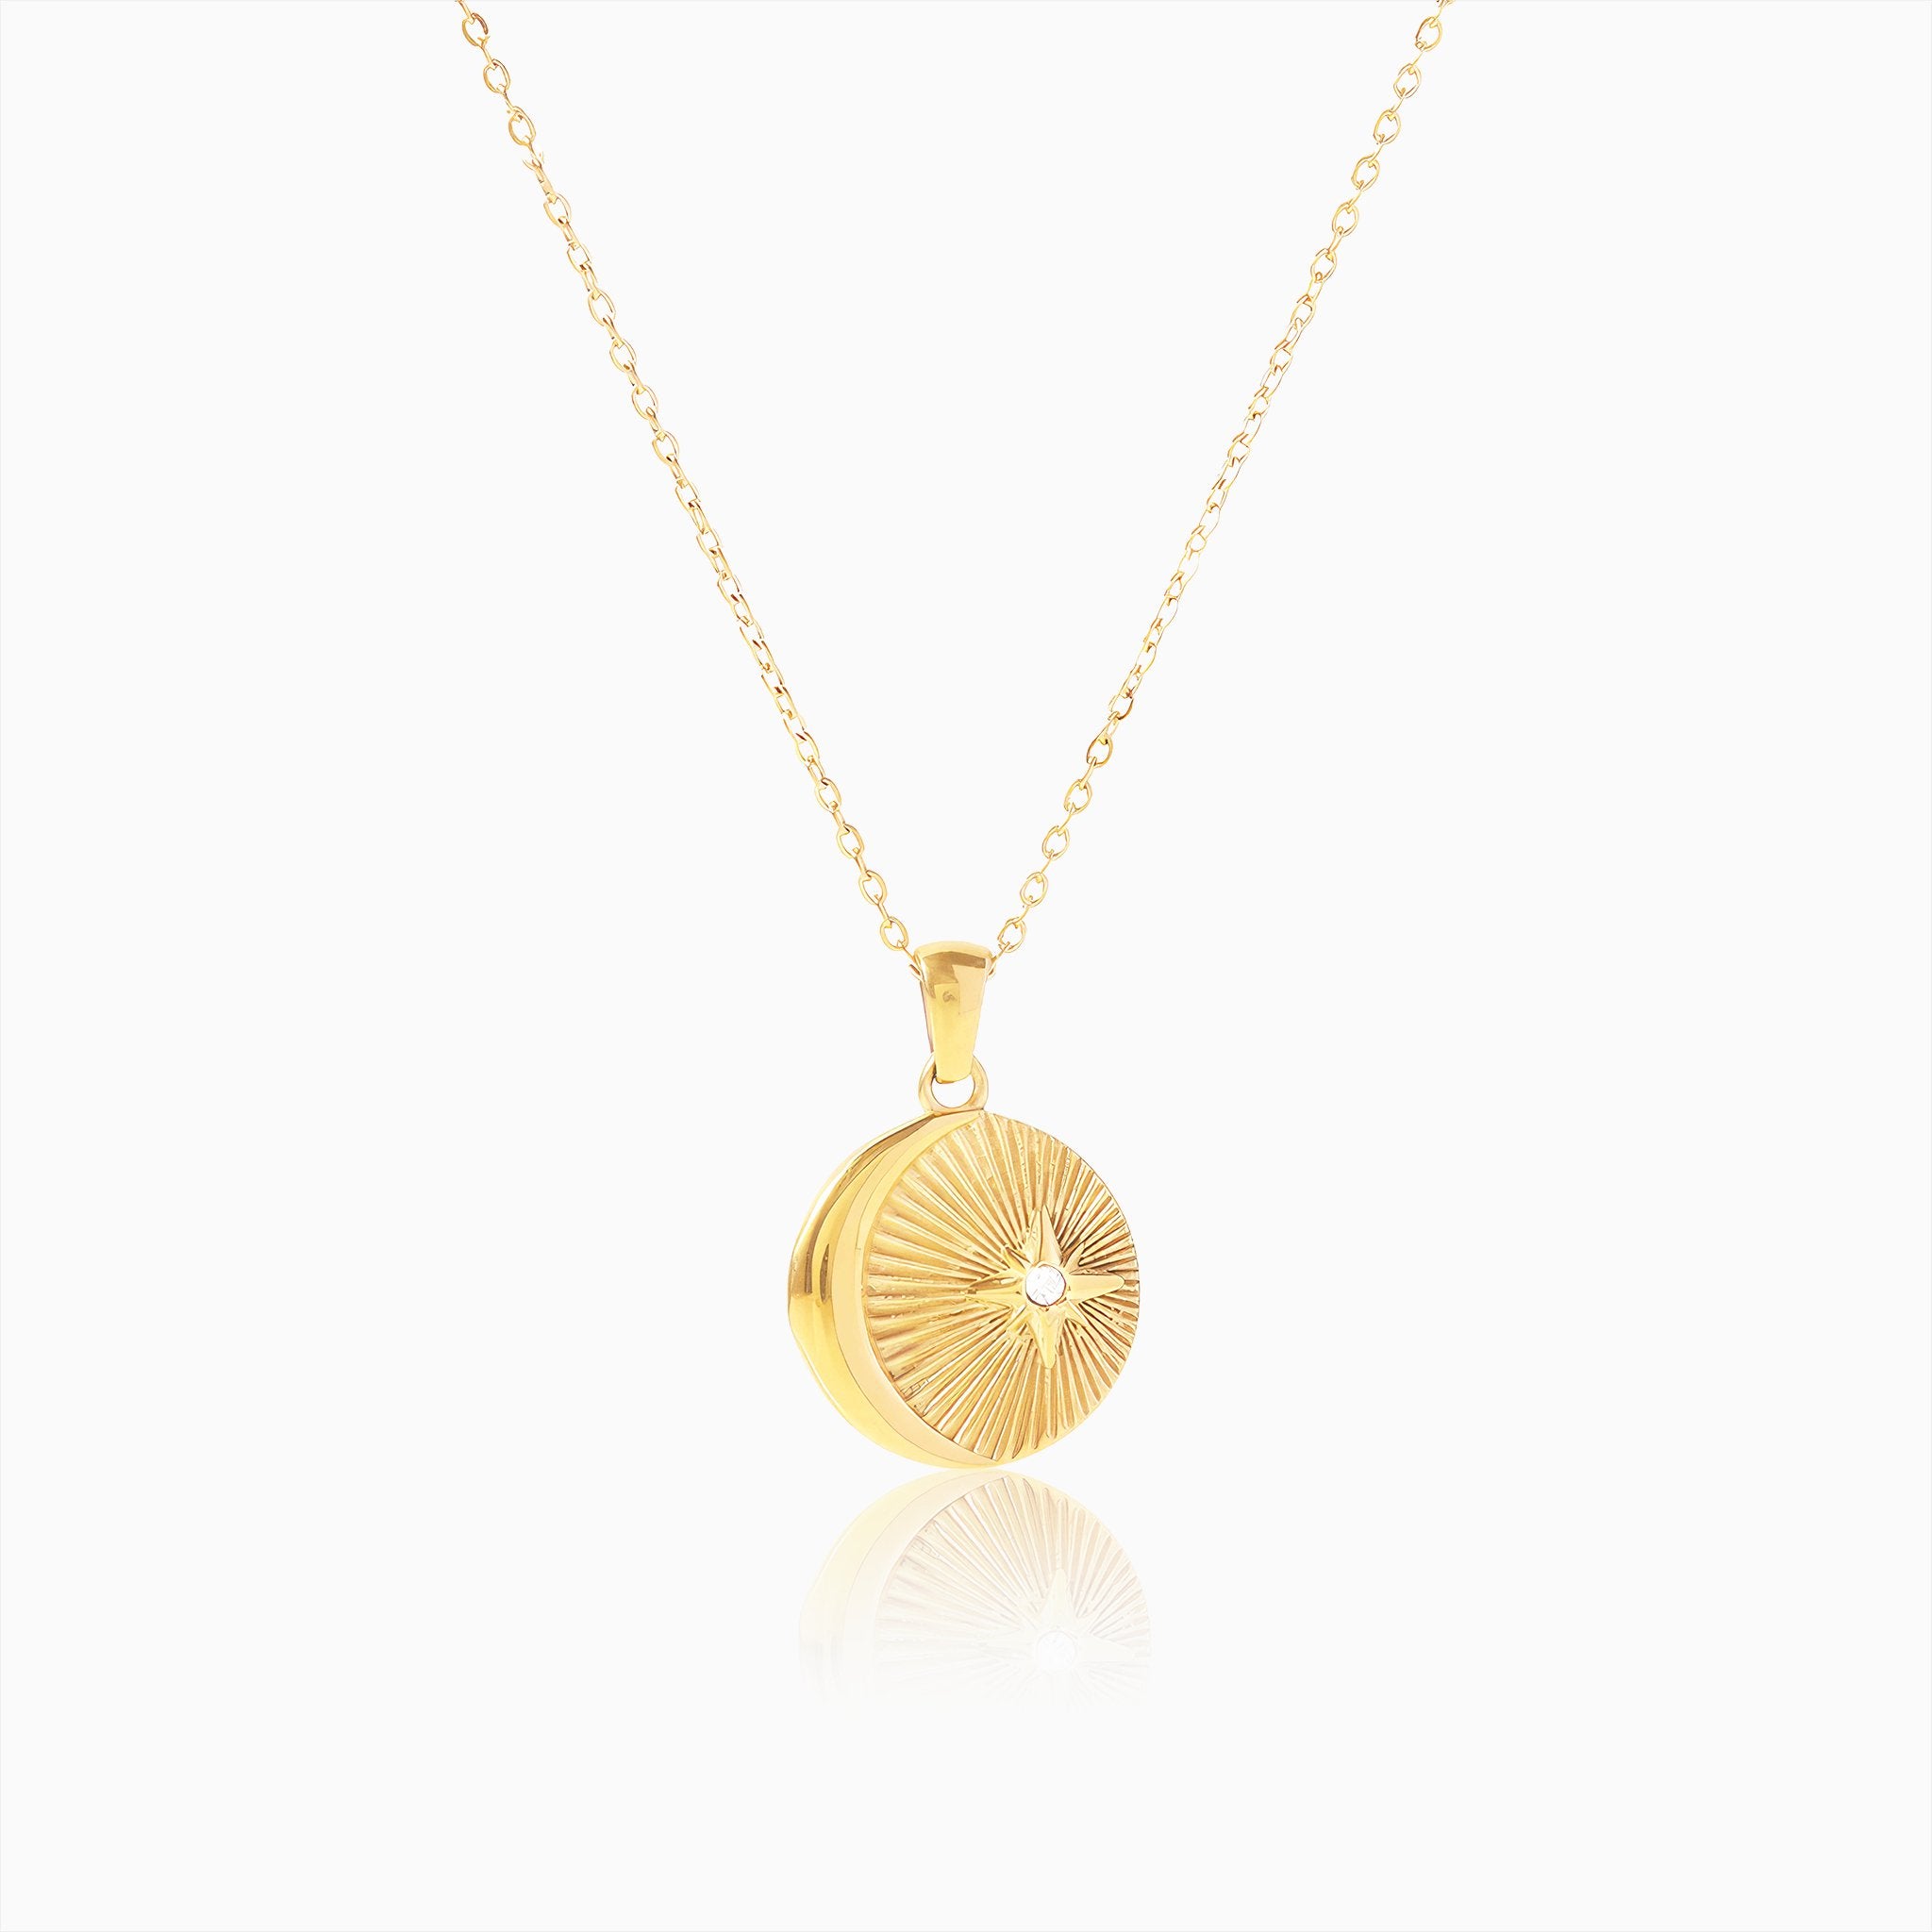 Sunlight Pendant Necklace - Nobbier - Necklace - 18K Gold And Titanium PVD Coated Jewelry